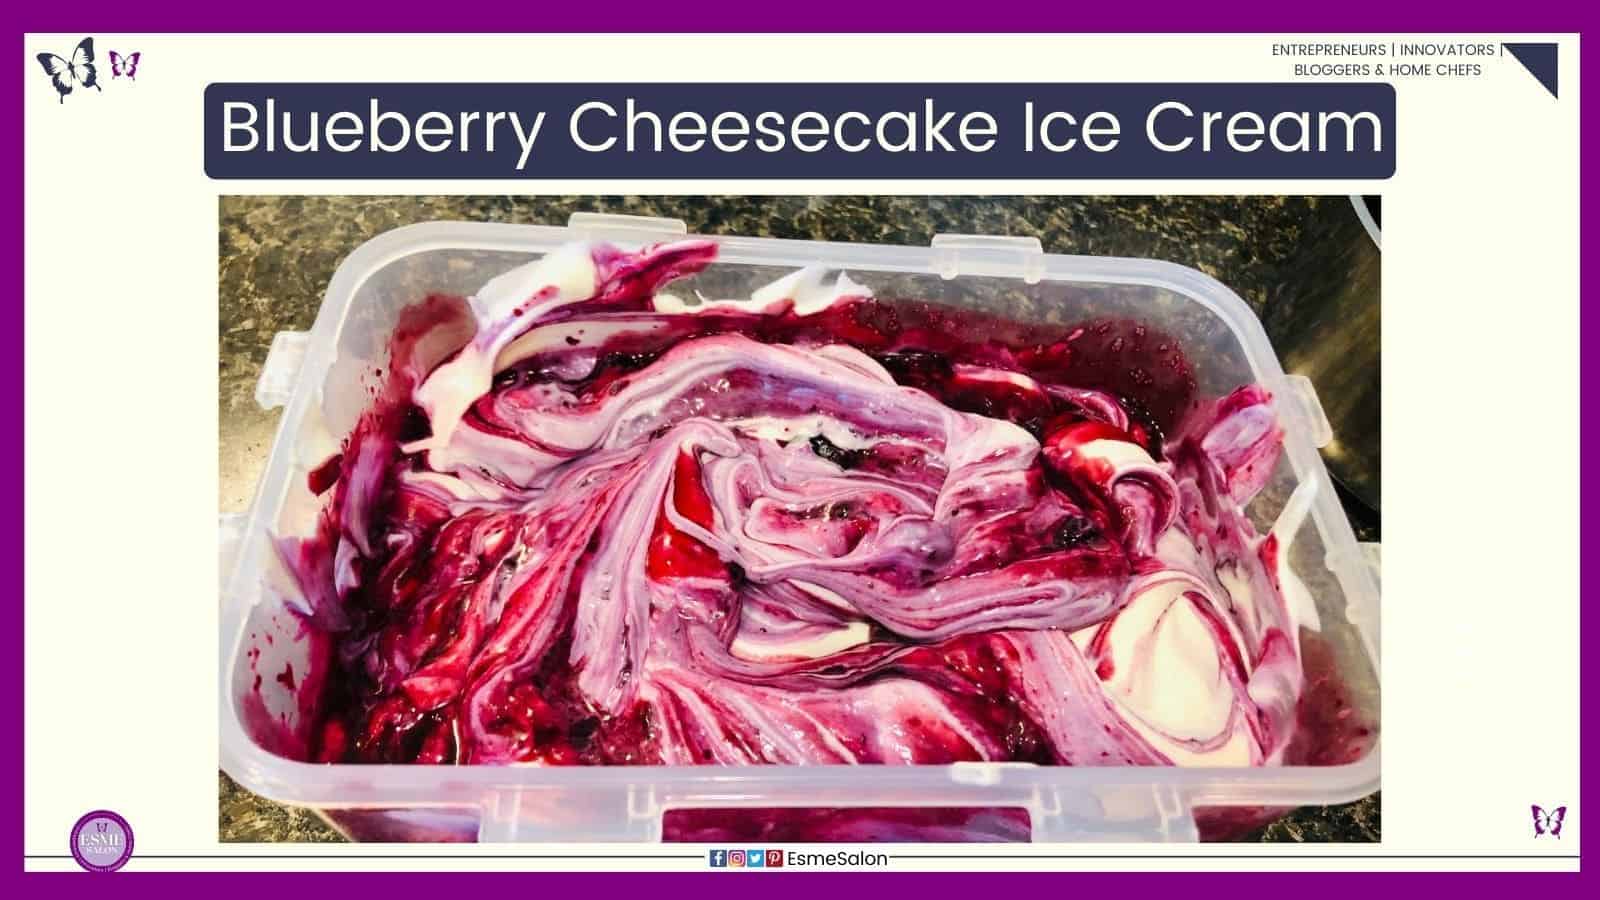 an image of Blueberry Cheesecake Ice Cream in a plastic container